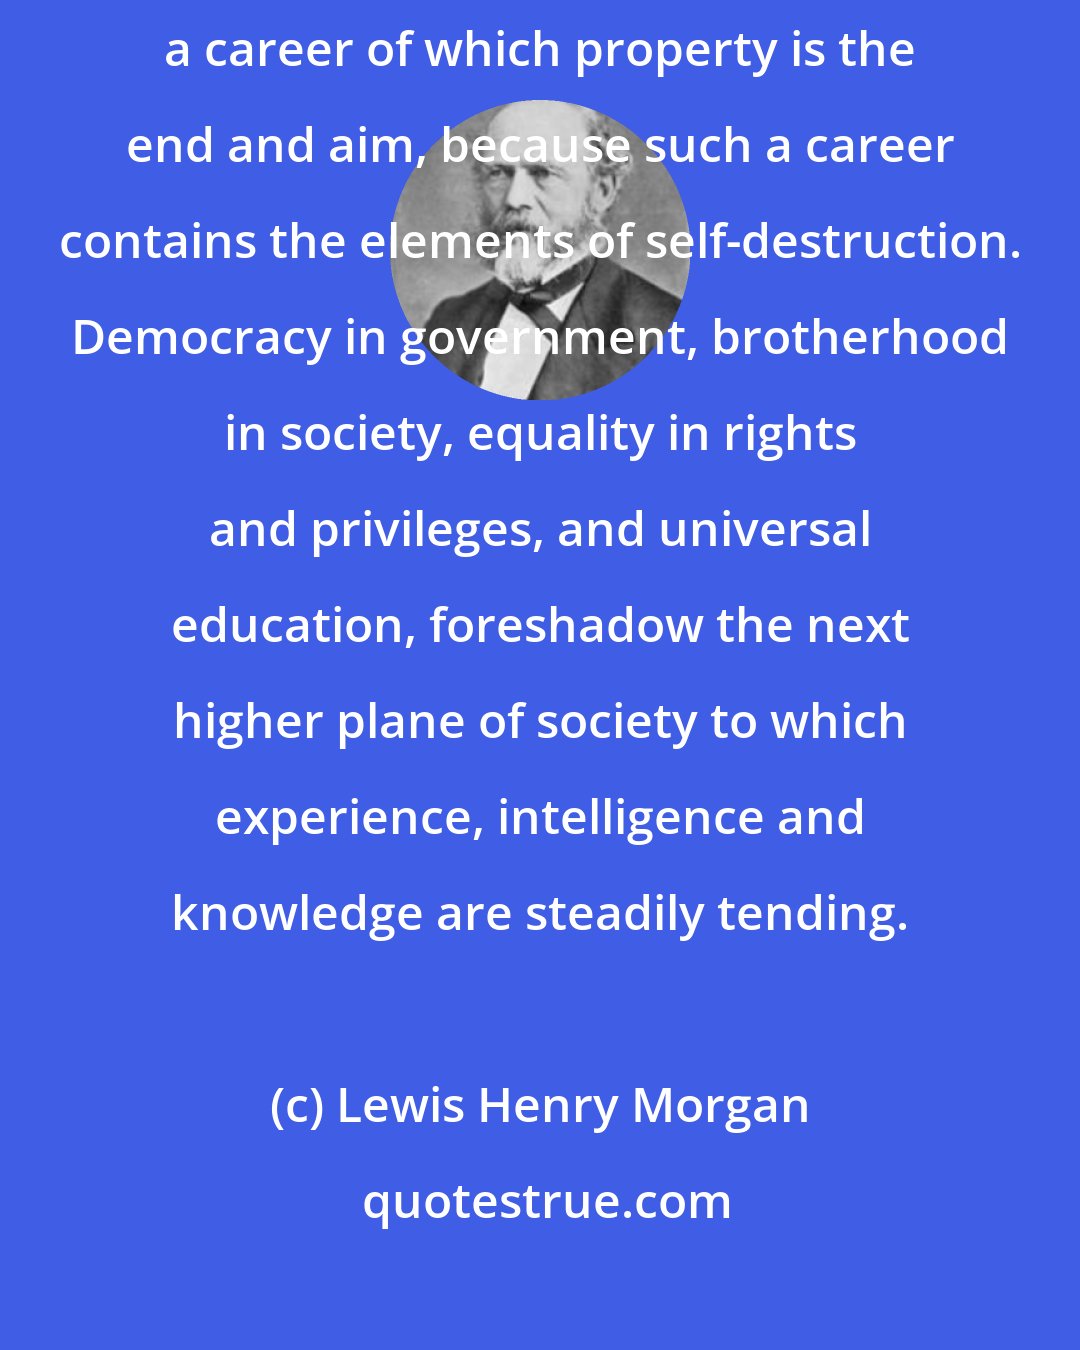 Lewis Henry Morgan: The dissolution of society bids fair to become the termination of a career of which property is the end and aim, because such a career contains the elements of self-destruction. Democracy in government, brotherhood in society, equality in rights and privileges, and universal education, foreshadow the next higher plane of society to which experience, intelligence and knowledge are steadily tending.